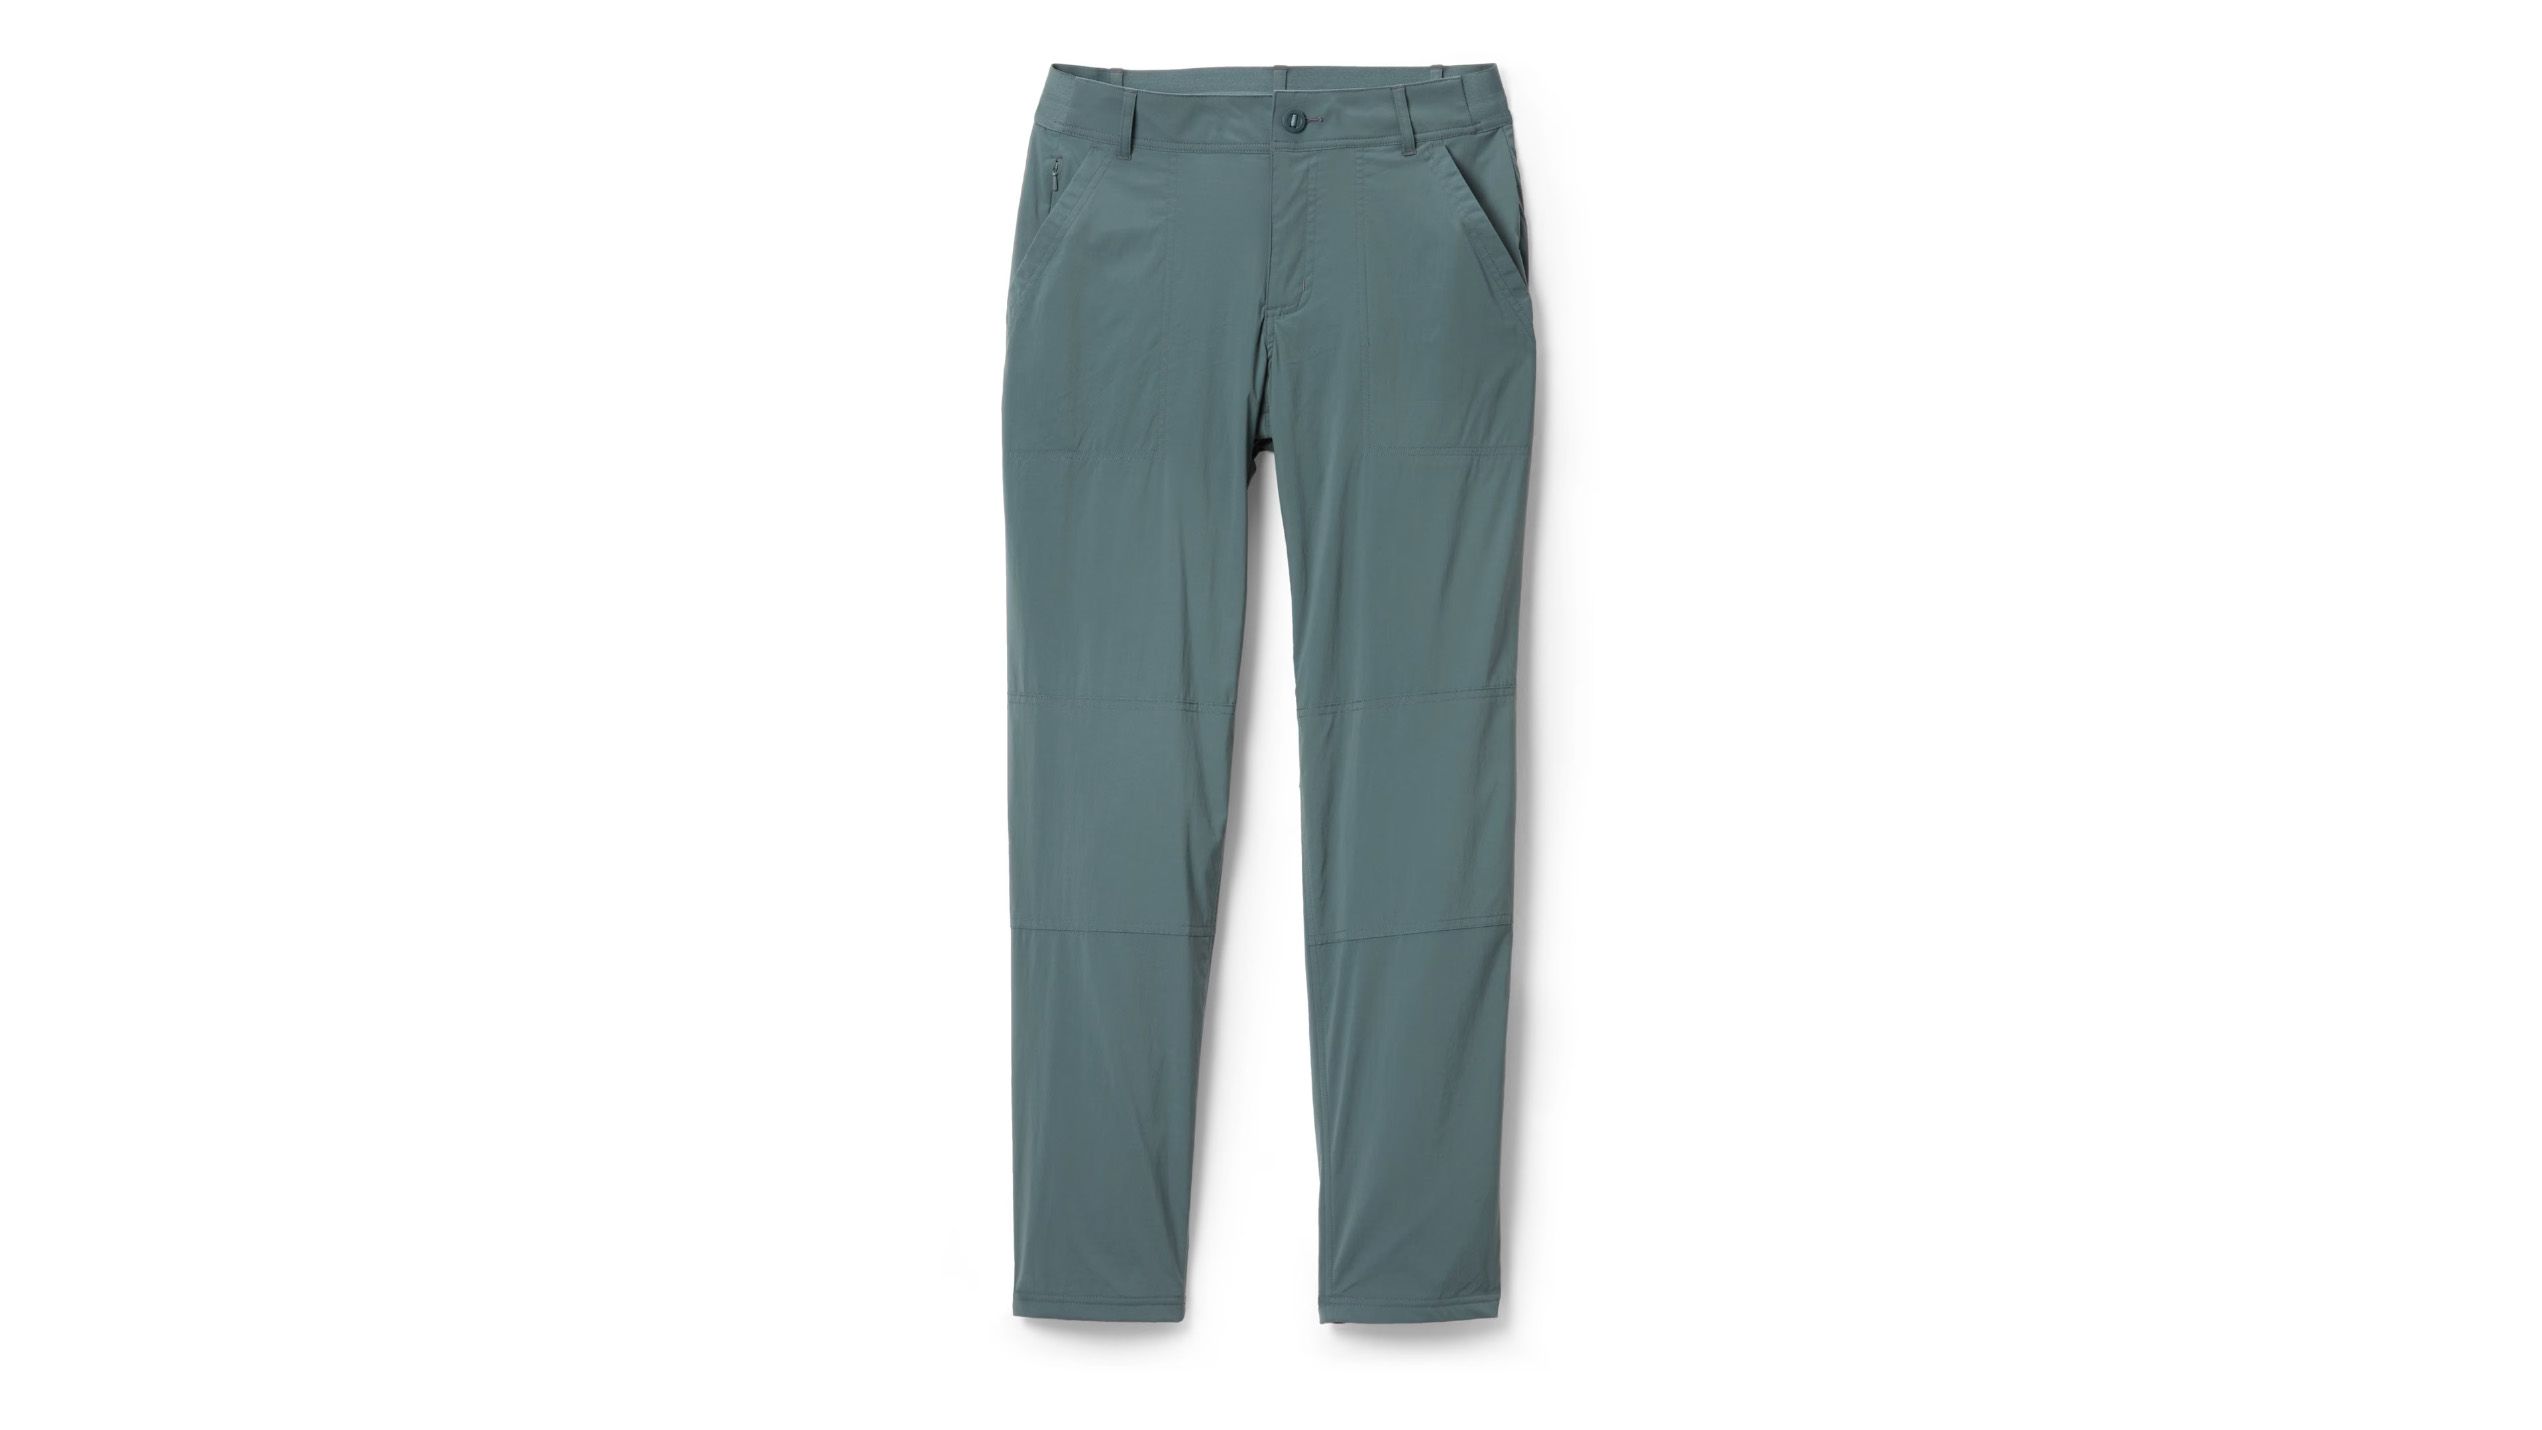 Land's End Women's Pull On Athletic Green Active 5 Pocket Pants Sz